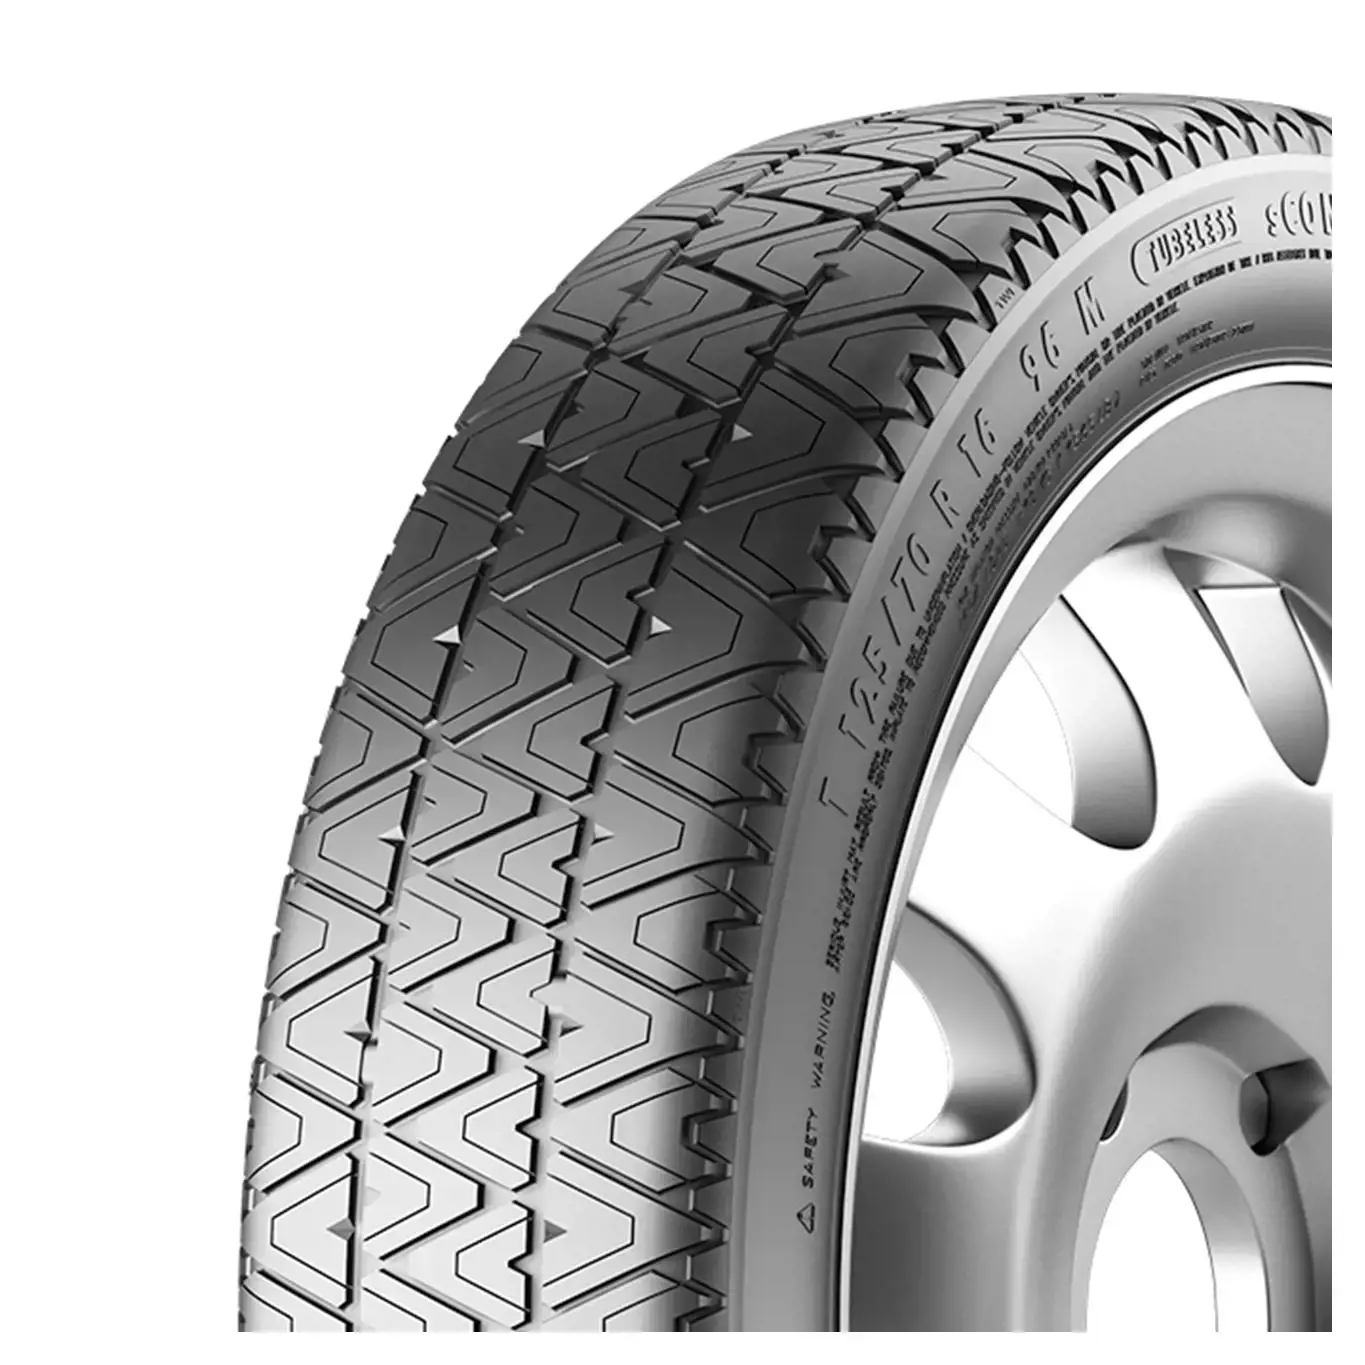 T135/90 R17 104M sContact